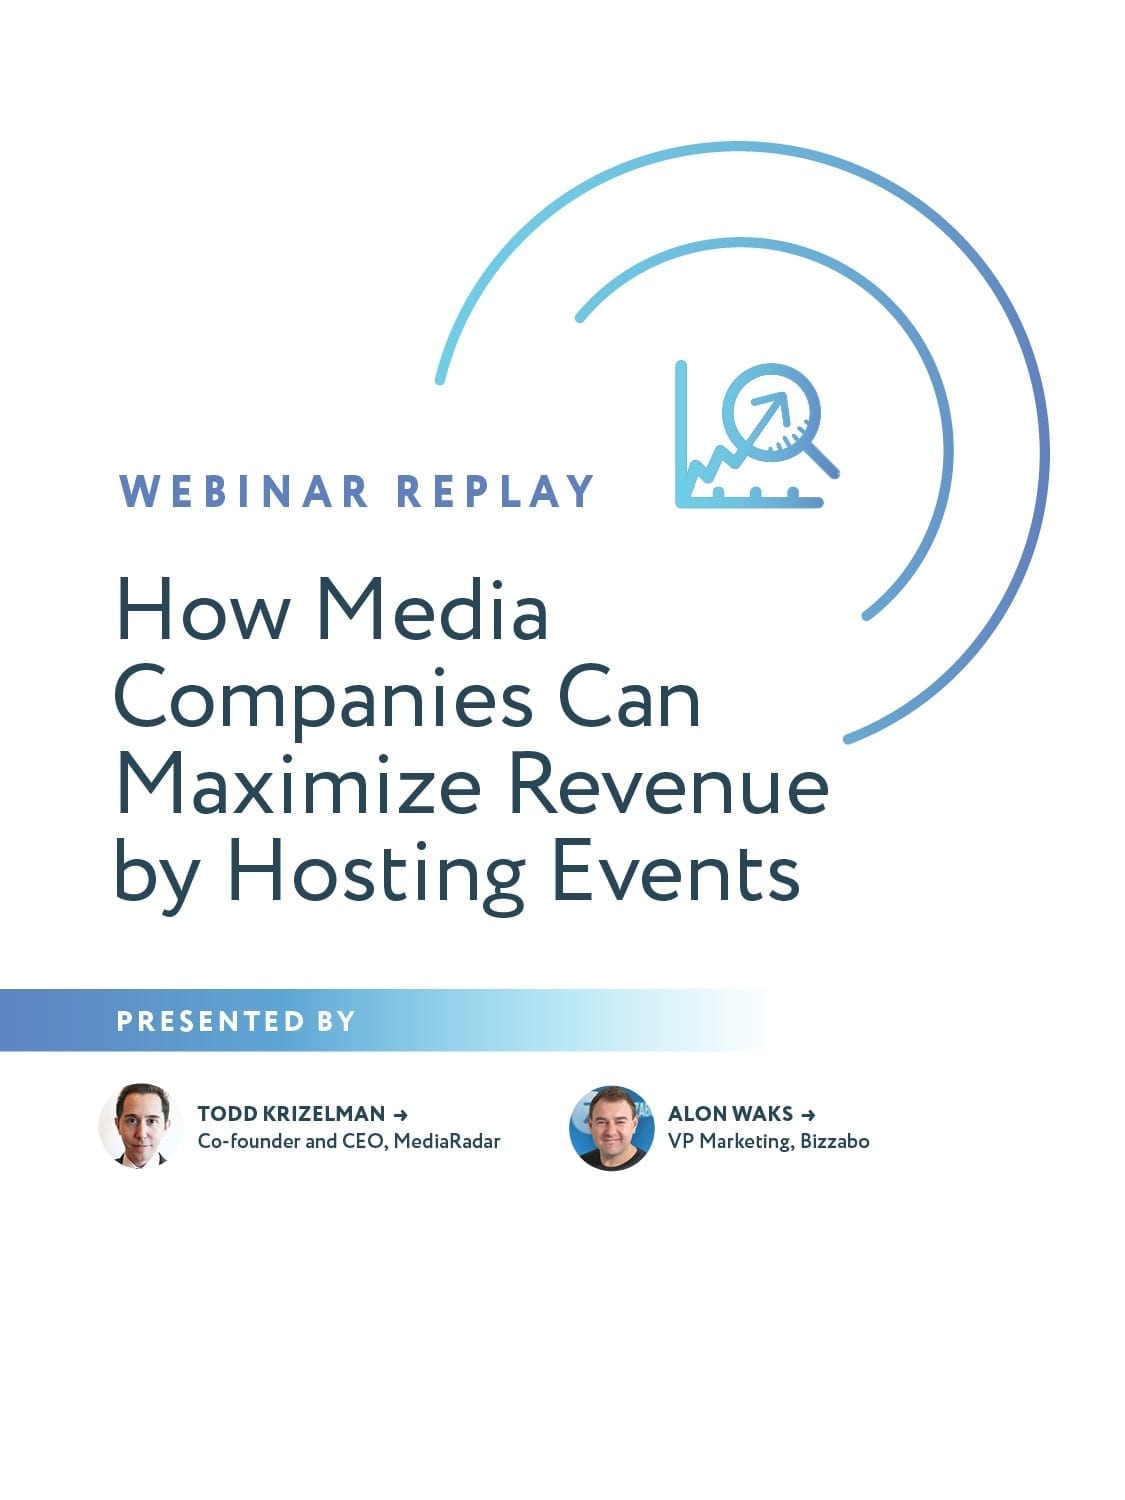 How Media Companies Can Maximize Revenue by Hosting Events – Webinar